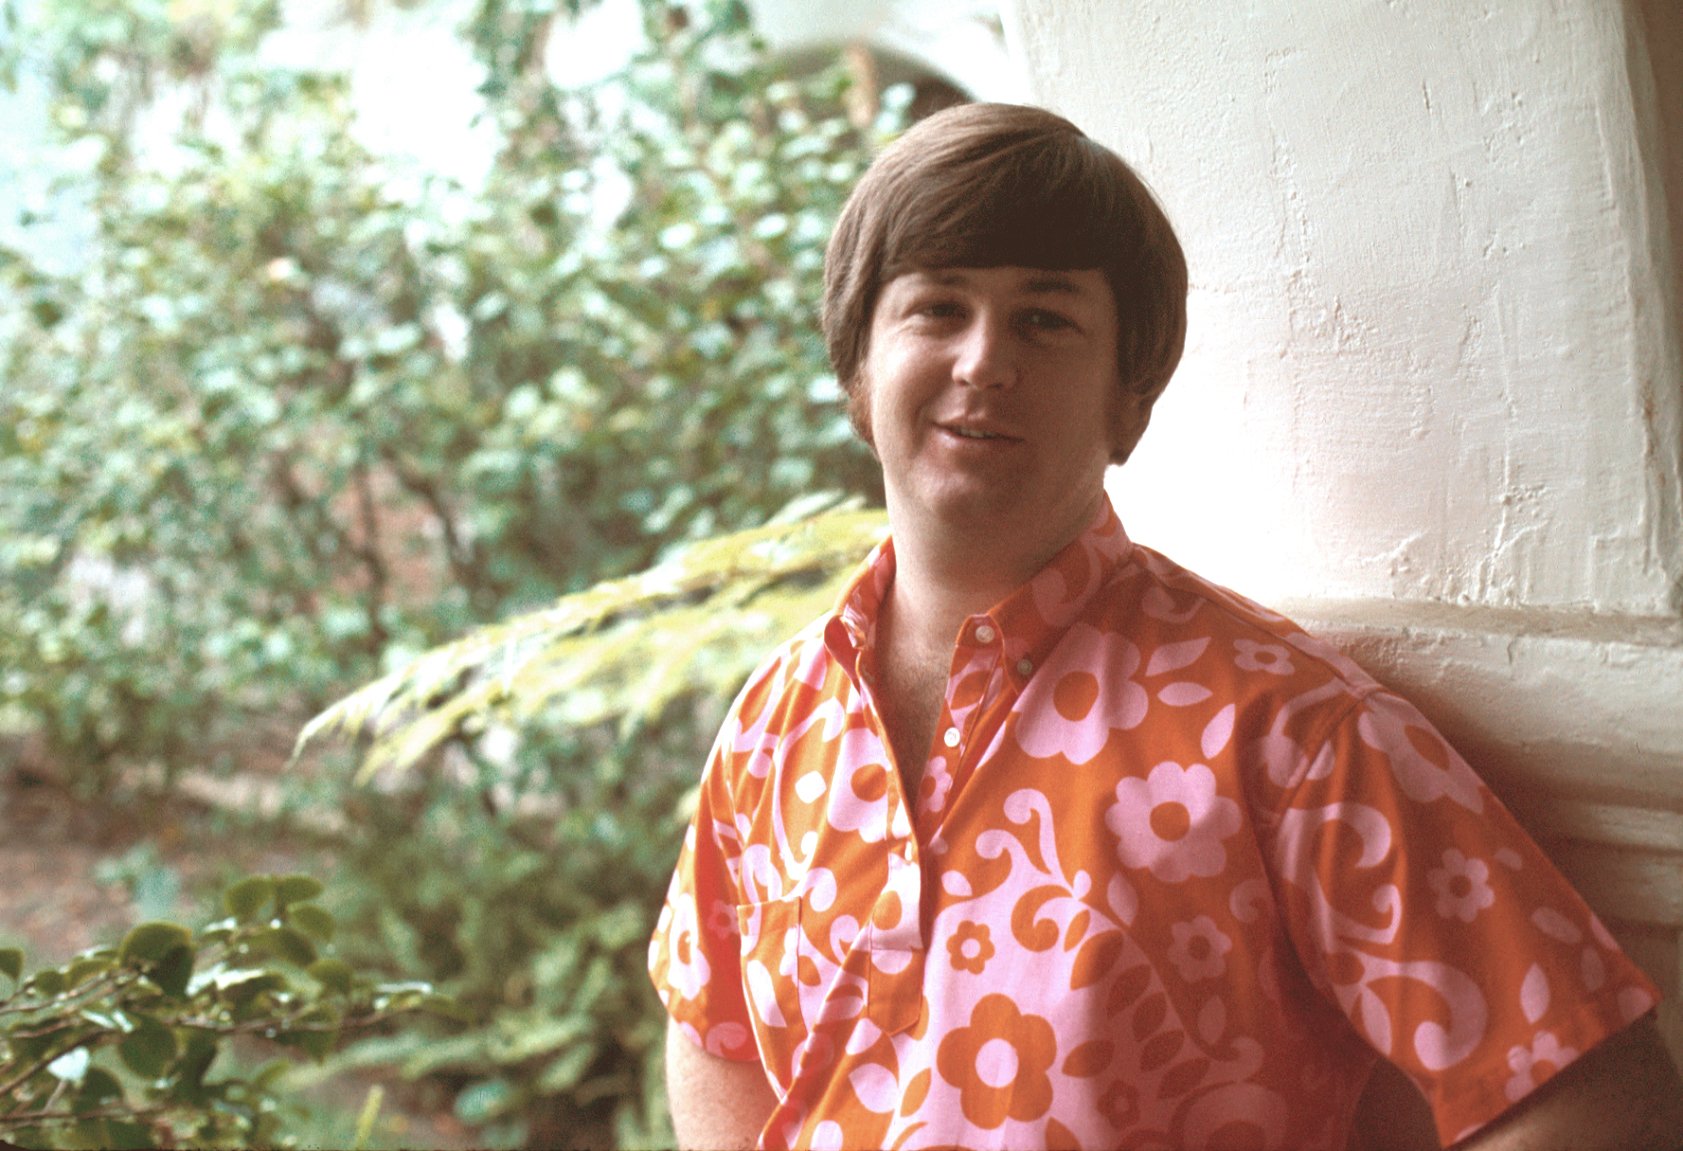 Band leader Brian Wilson of the rock and roll band The Beach Boys poses for a portrait in 1968